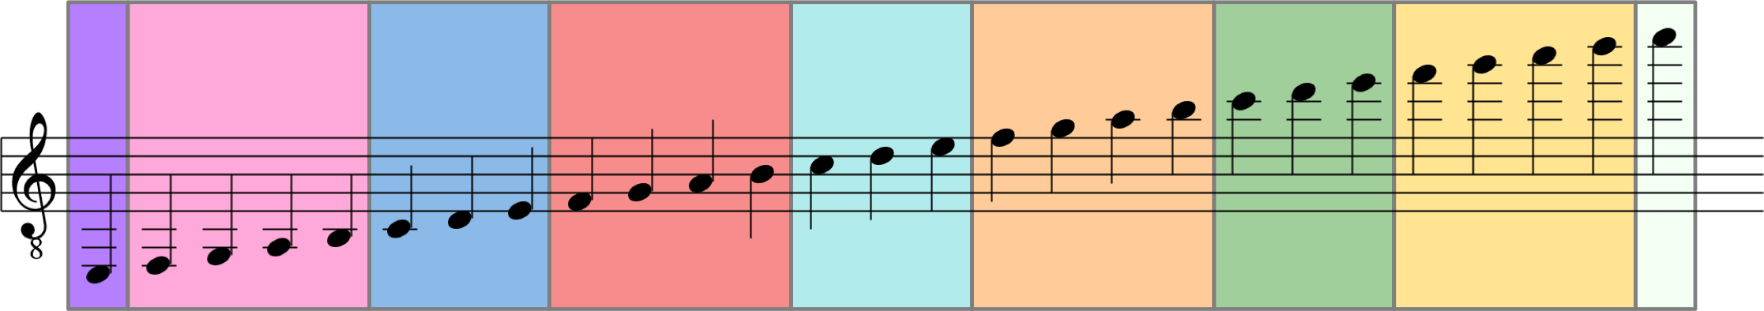 Notation with CDE and FGAB note ranges highlighted